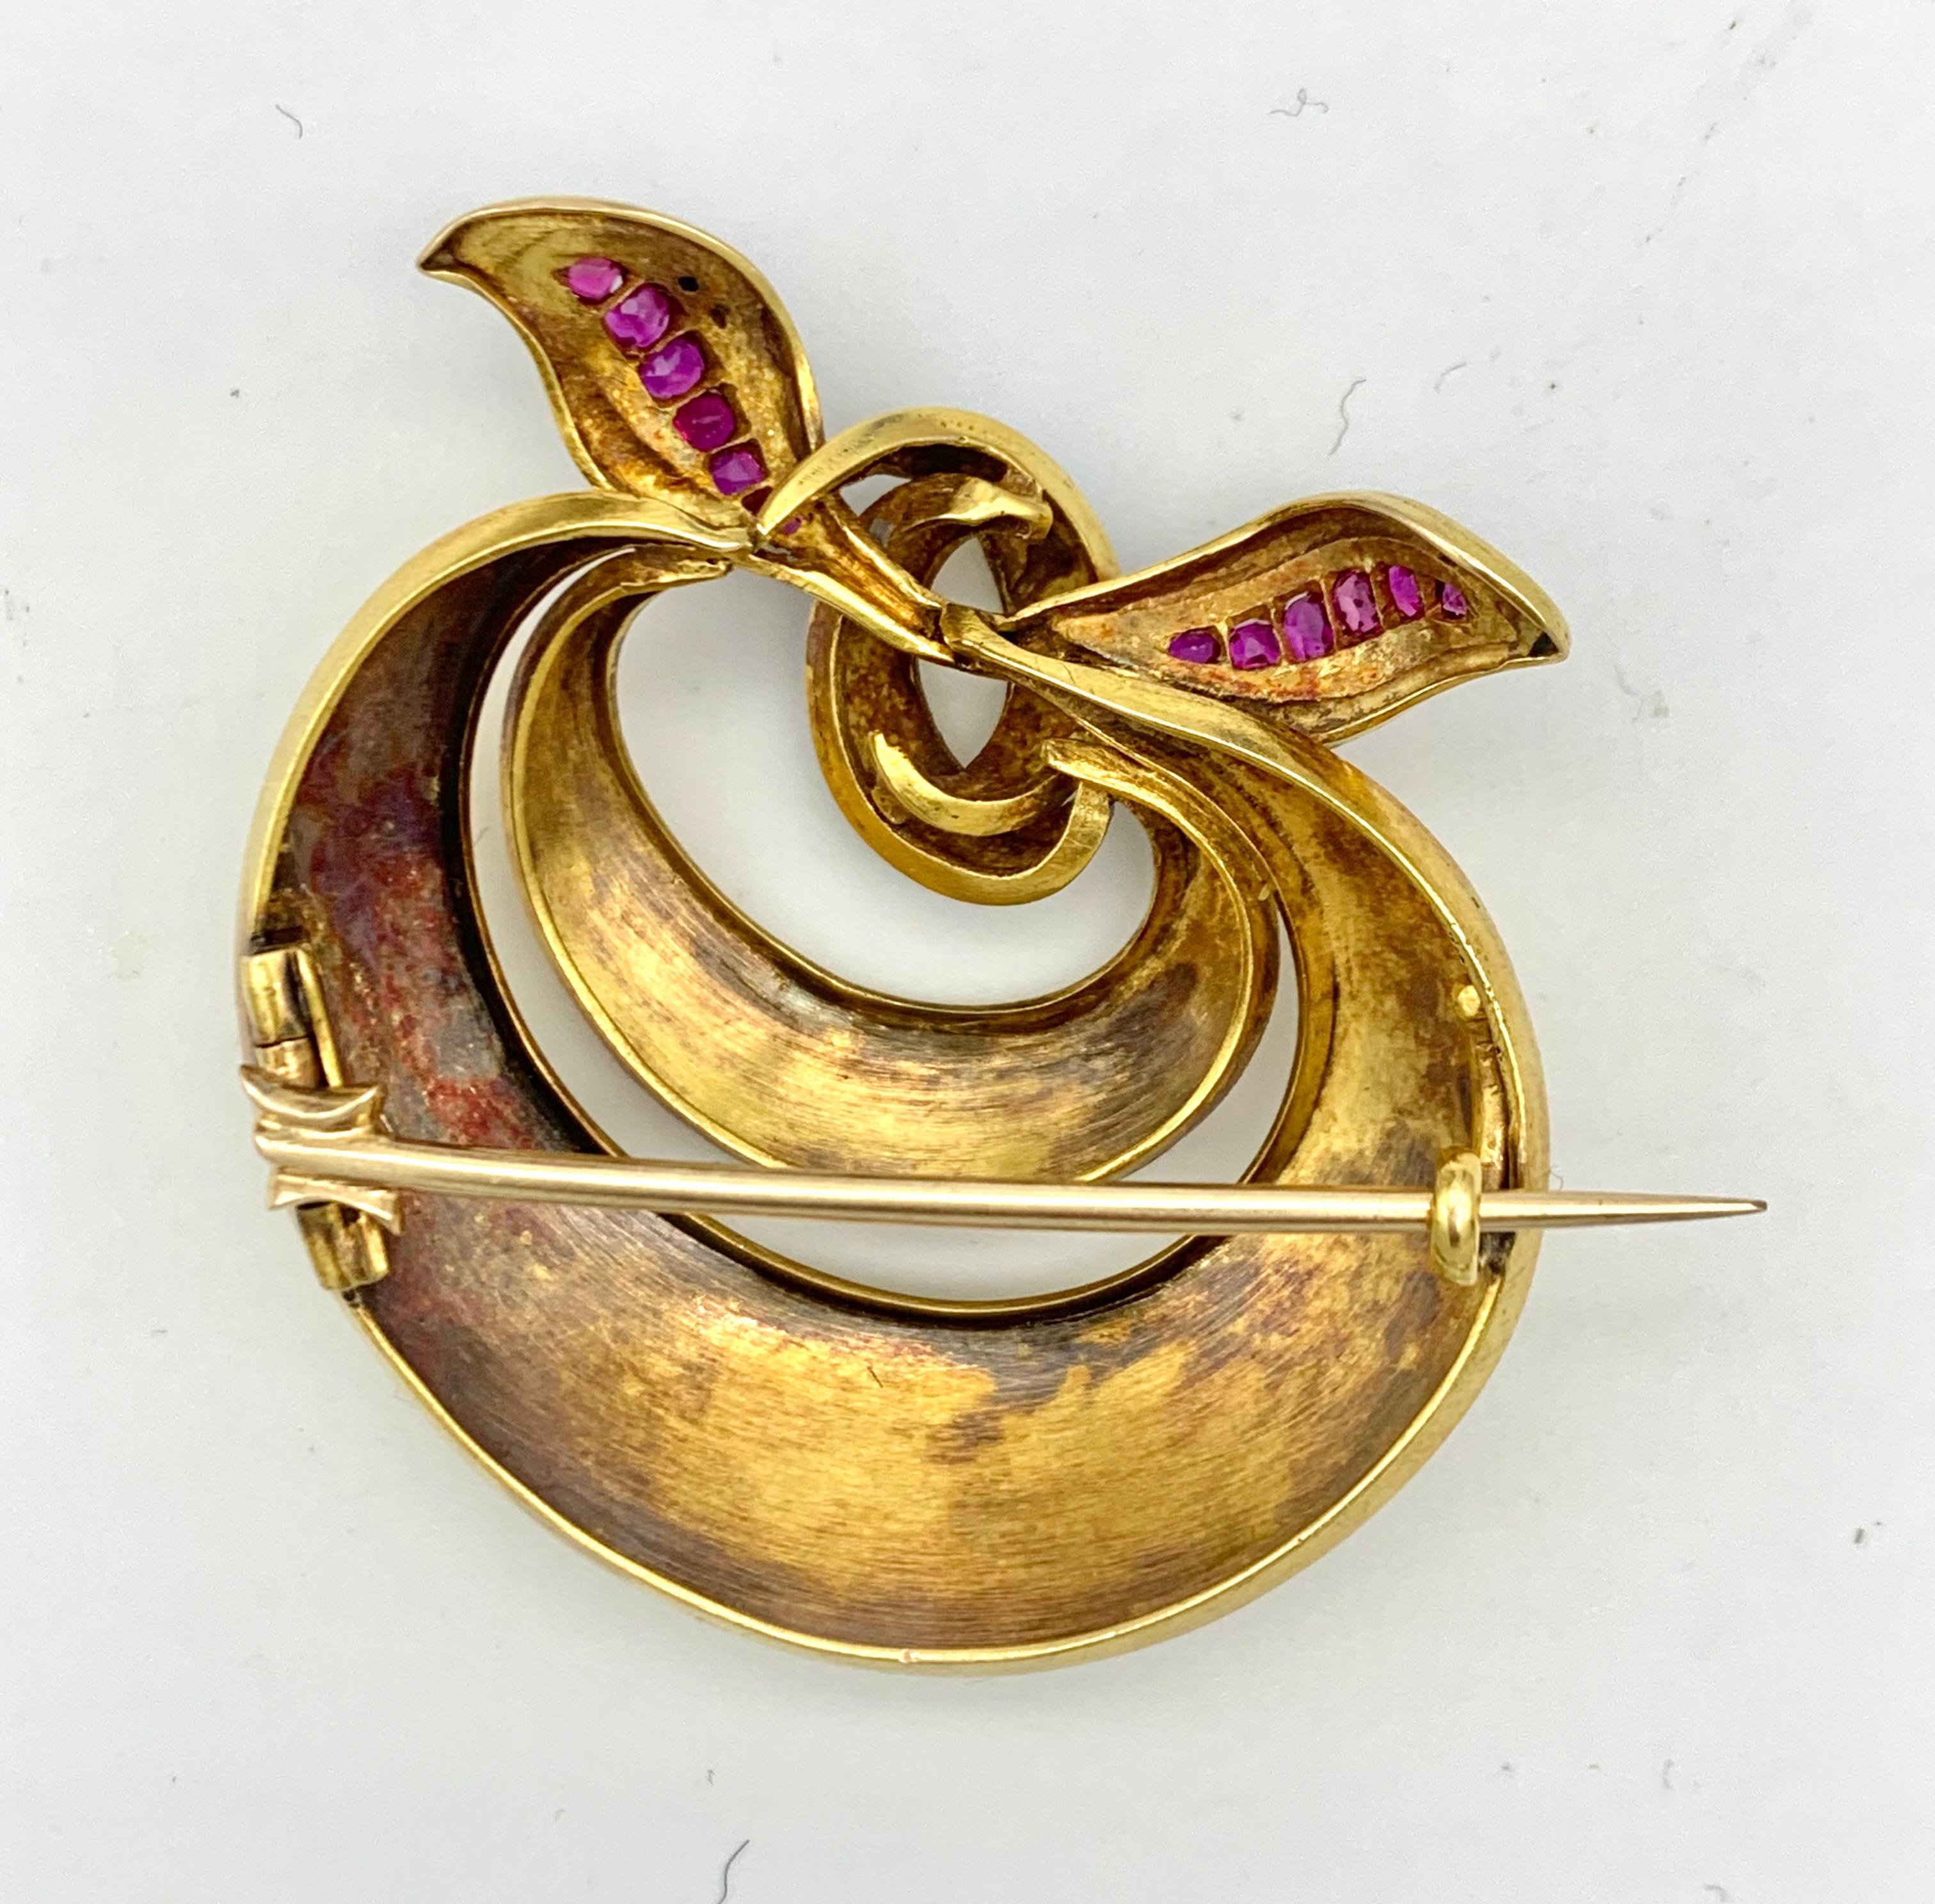 This early Victorian brooch was hand crafted from 15 karat gold and finely engraved with foliage framed by ornamental borders. The two gold hoops are held together by a pale blue enamelled gold ribbon set with natural rubies.